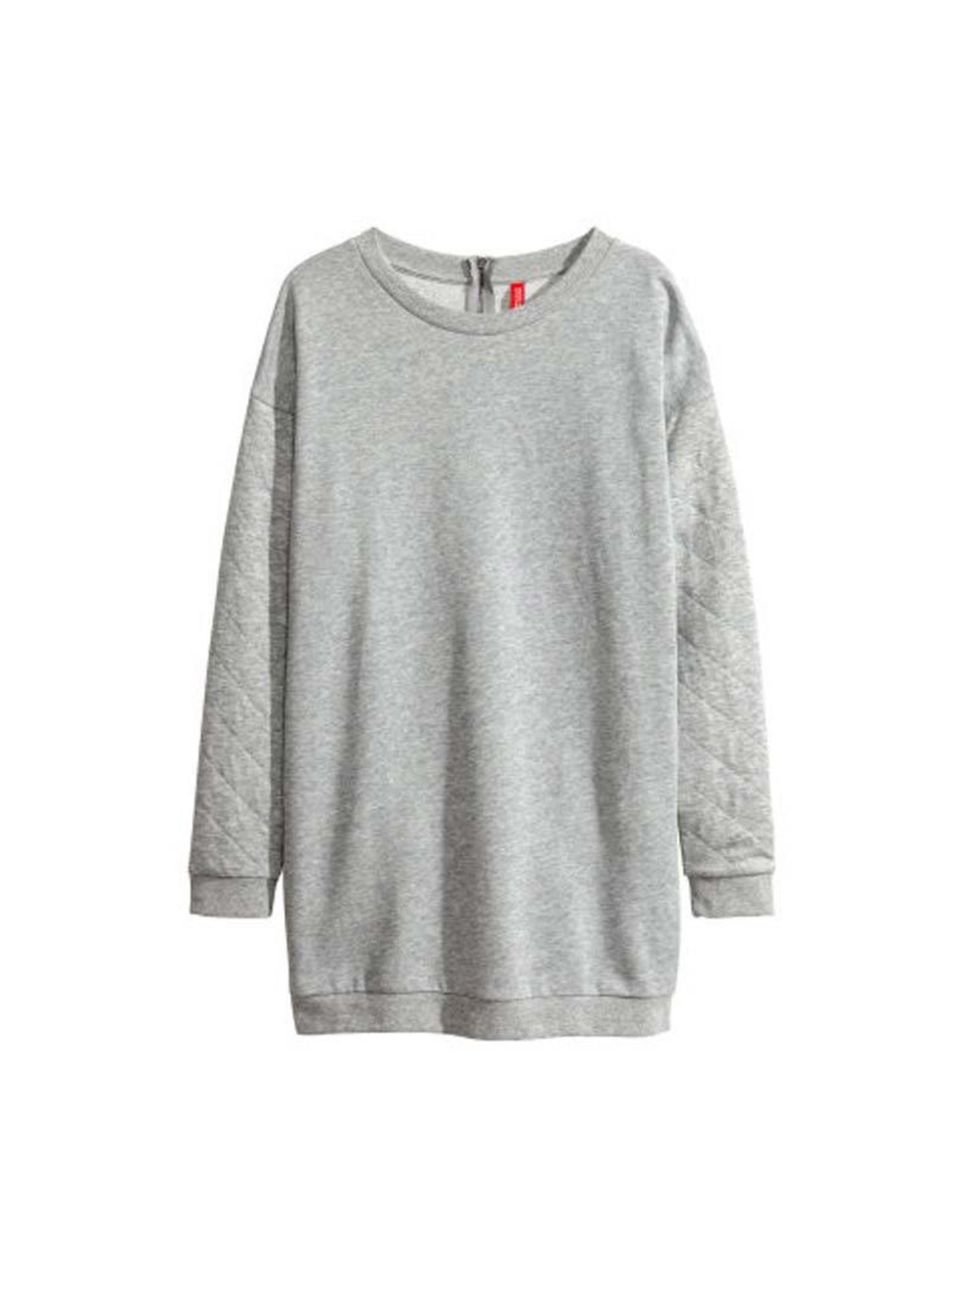 <p>A simple oversized sweatshirt is the perfect transeasonal staple</p><p><a href="http://www.hm.com/gb/product/23064?article=23064-B">H&amp;M</a>, £14.99</p>